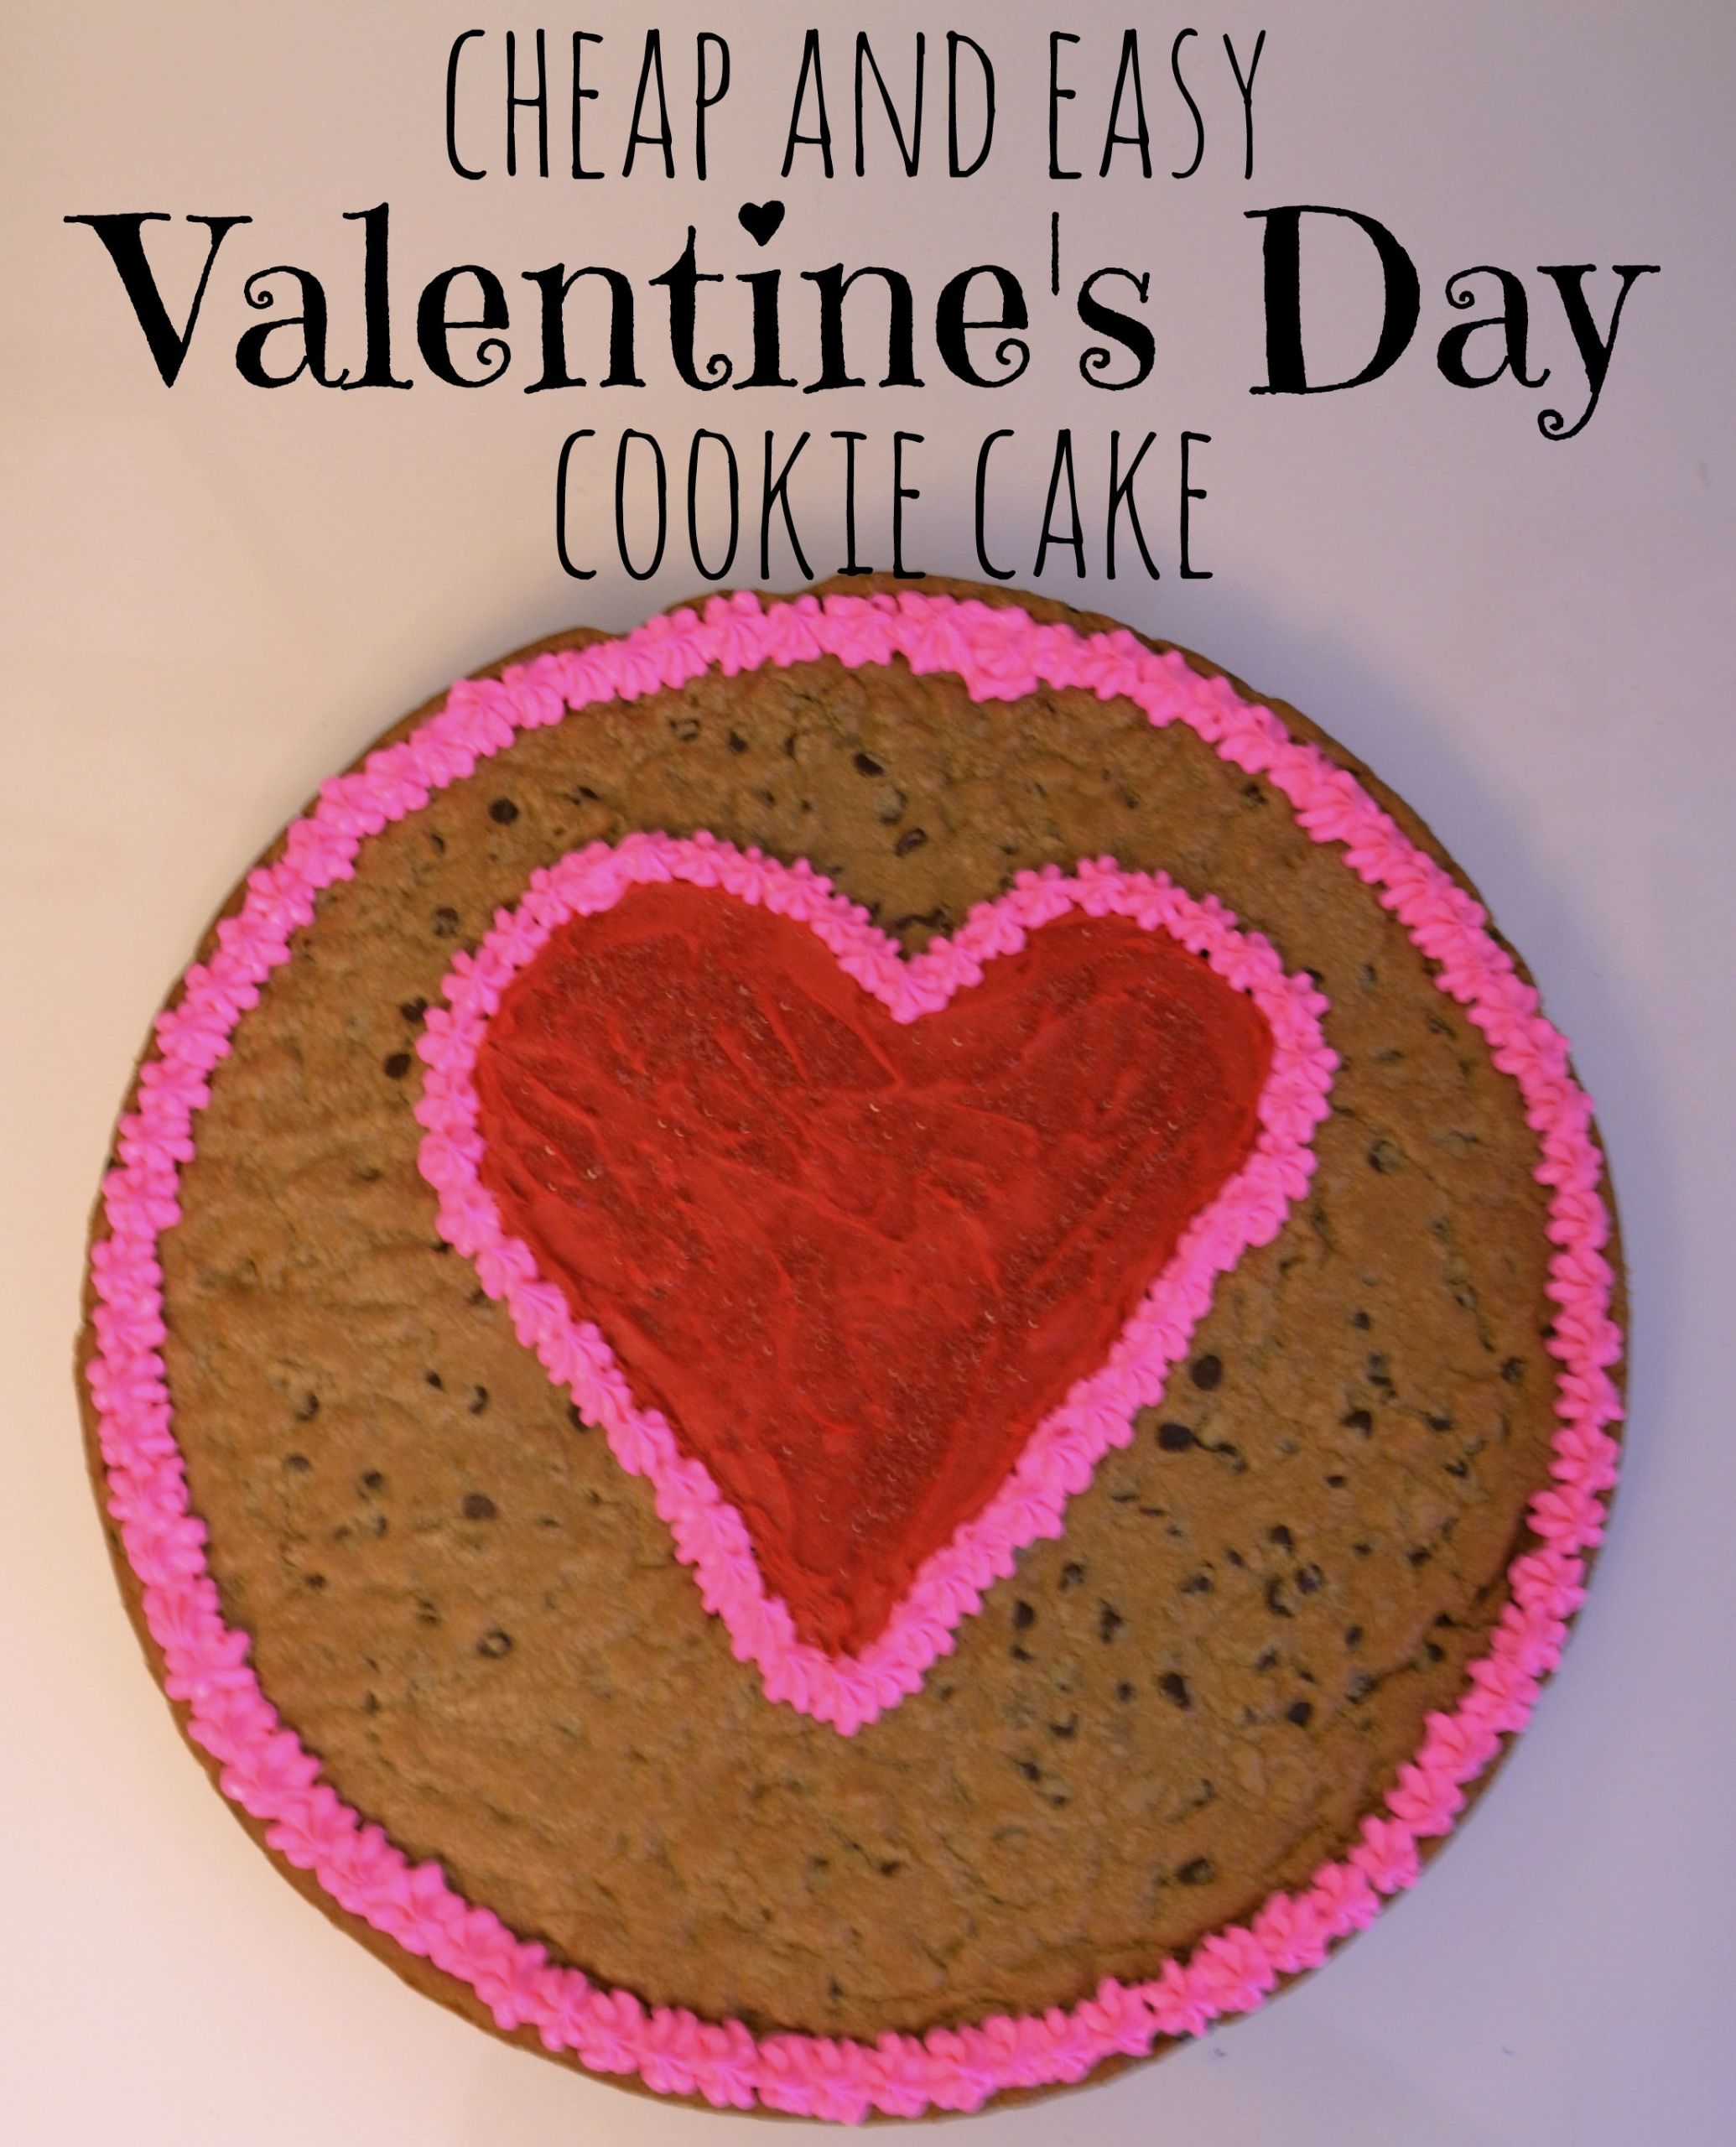 Valentines Day Cookie Cakes
 Cheap and Easy Valentine s Day Cookie Cake Moms Without